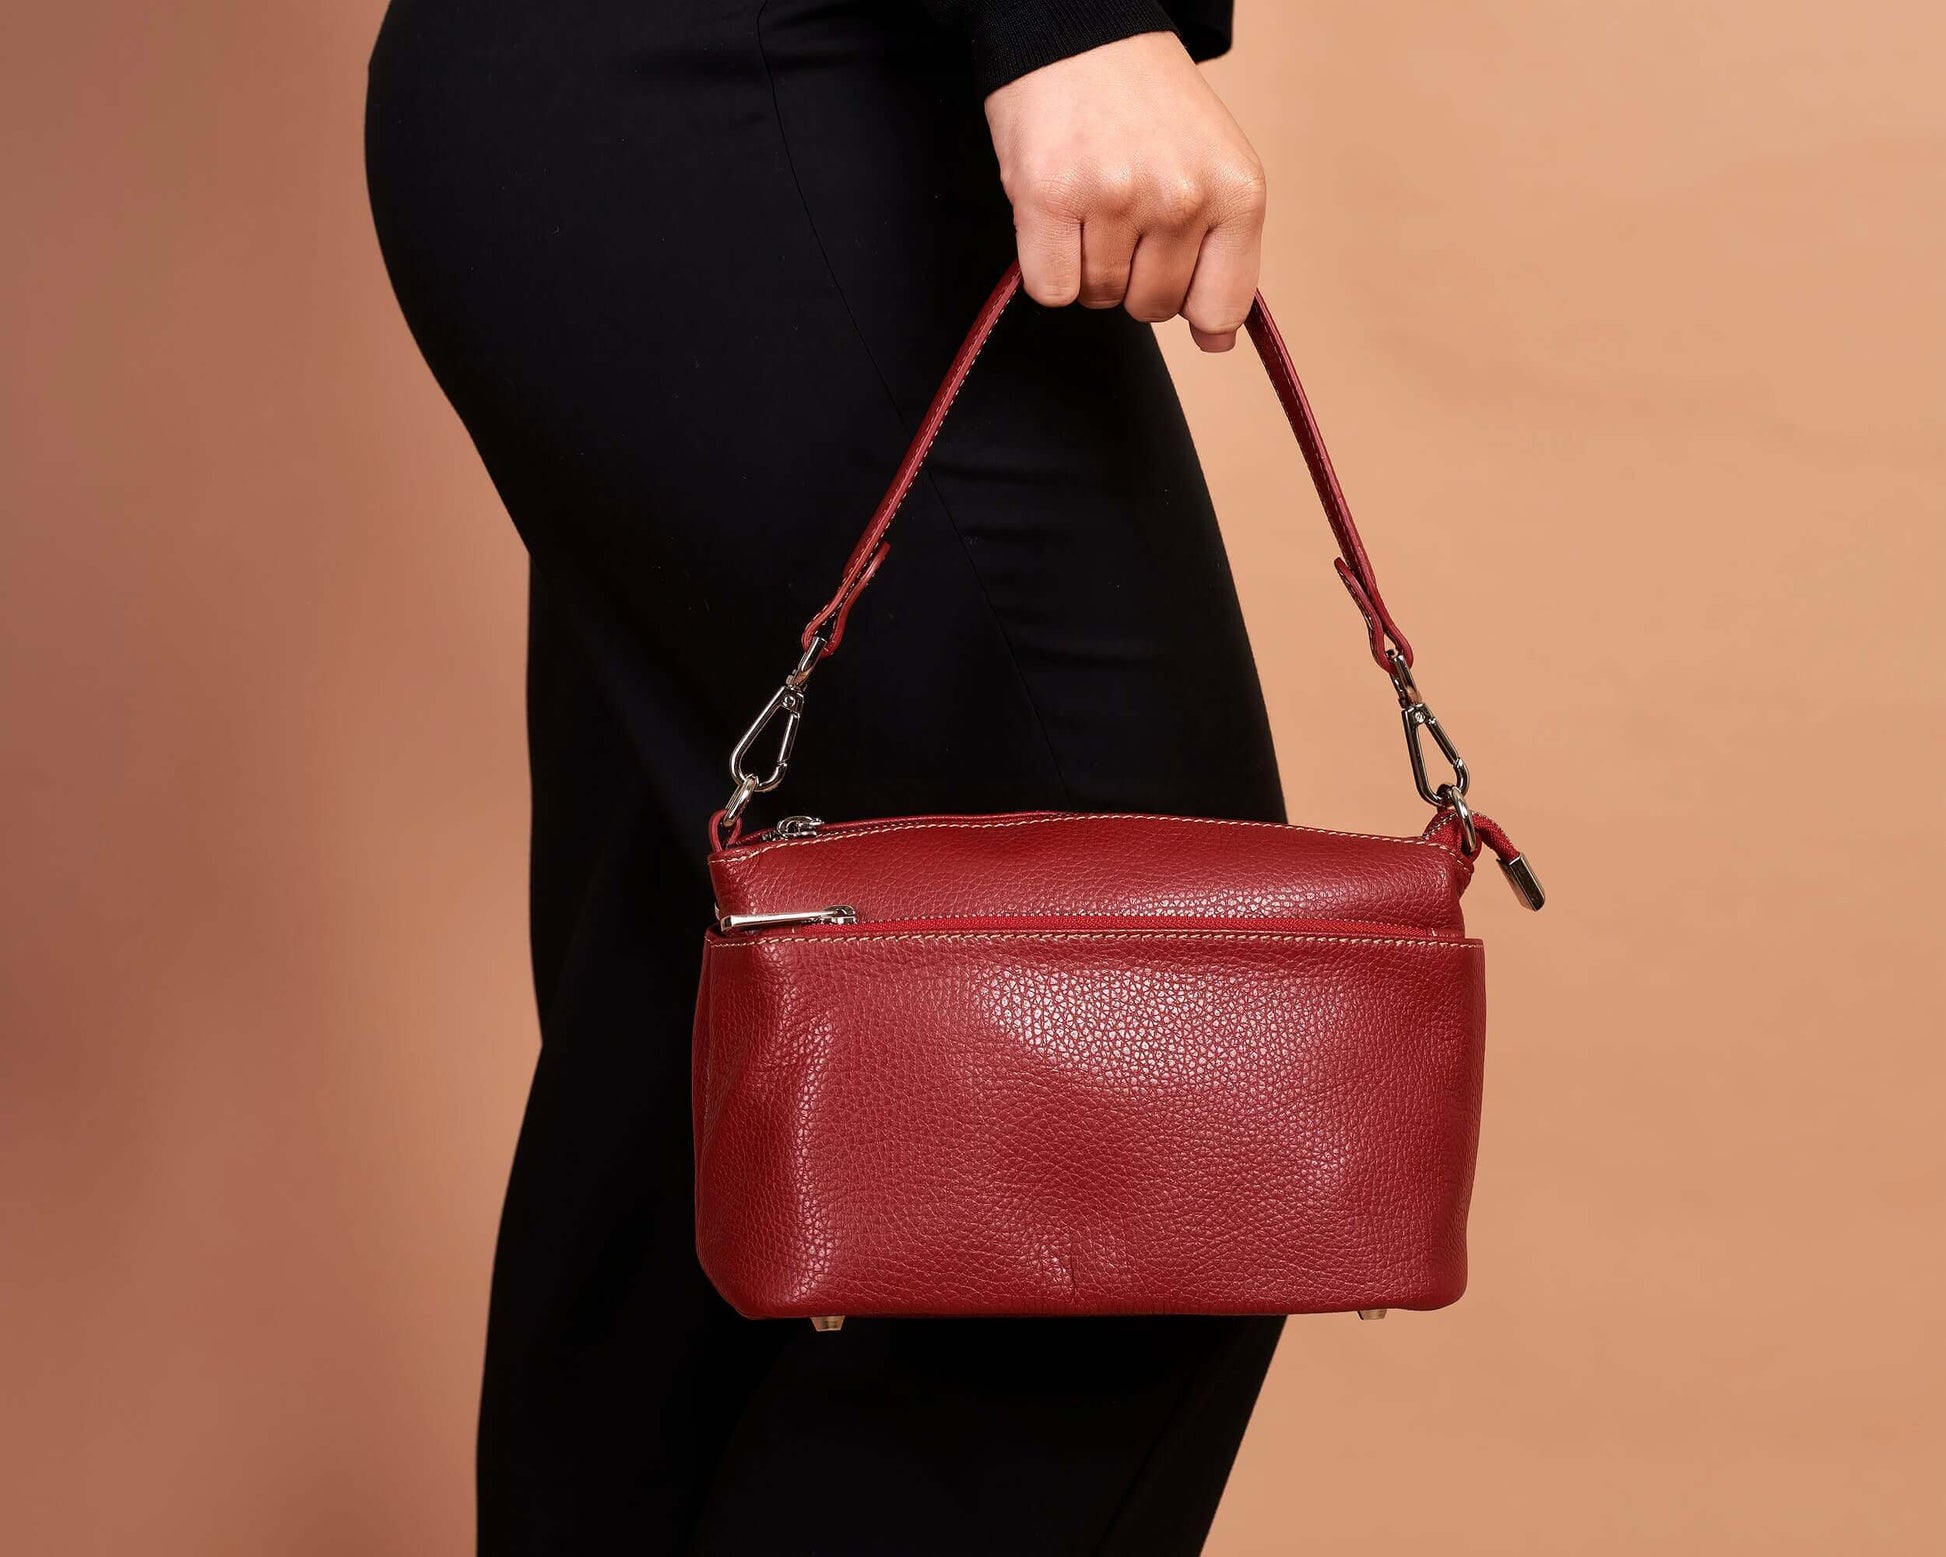 Bordeaux Leather Shoulder Bag, Small Crossbody Bag, Three Compartments, Made In Italy, Genuine Leather, "Fifi" Bag